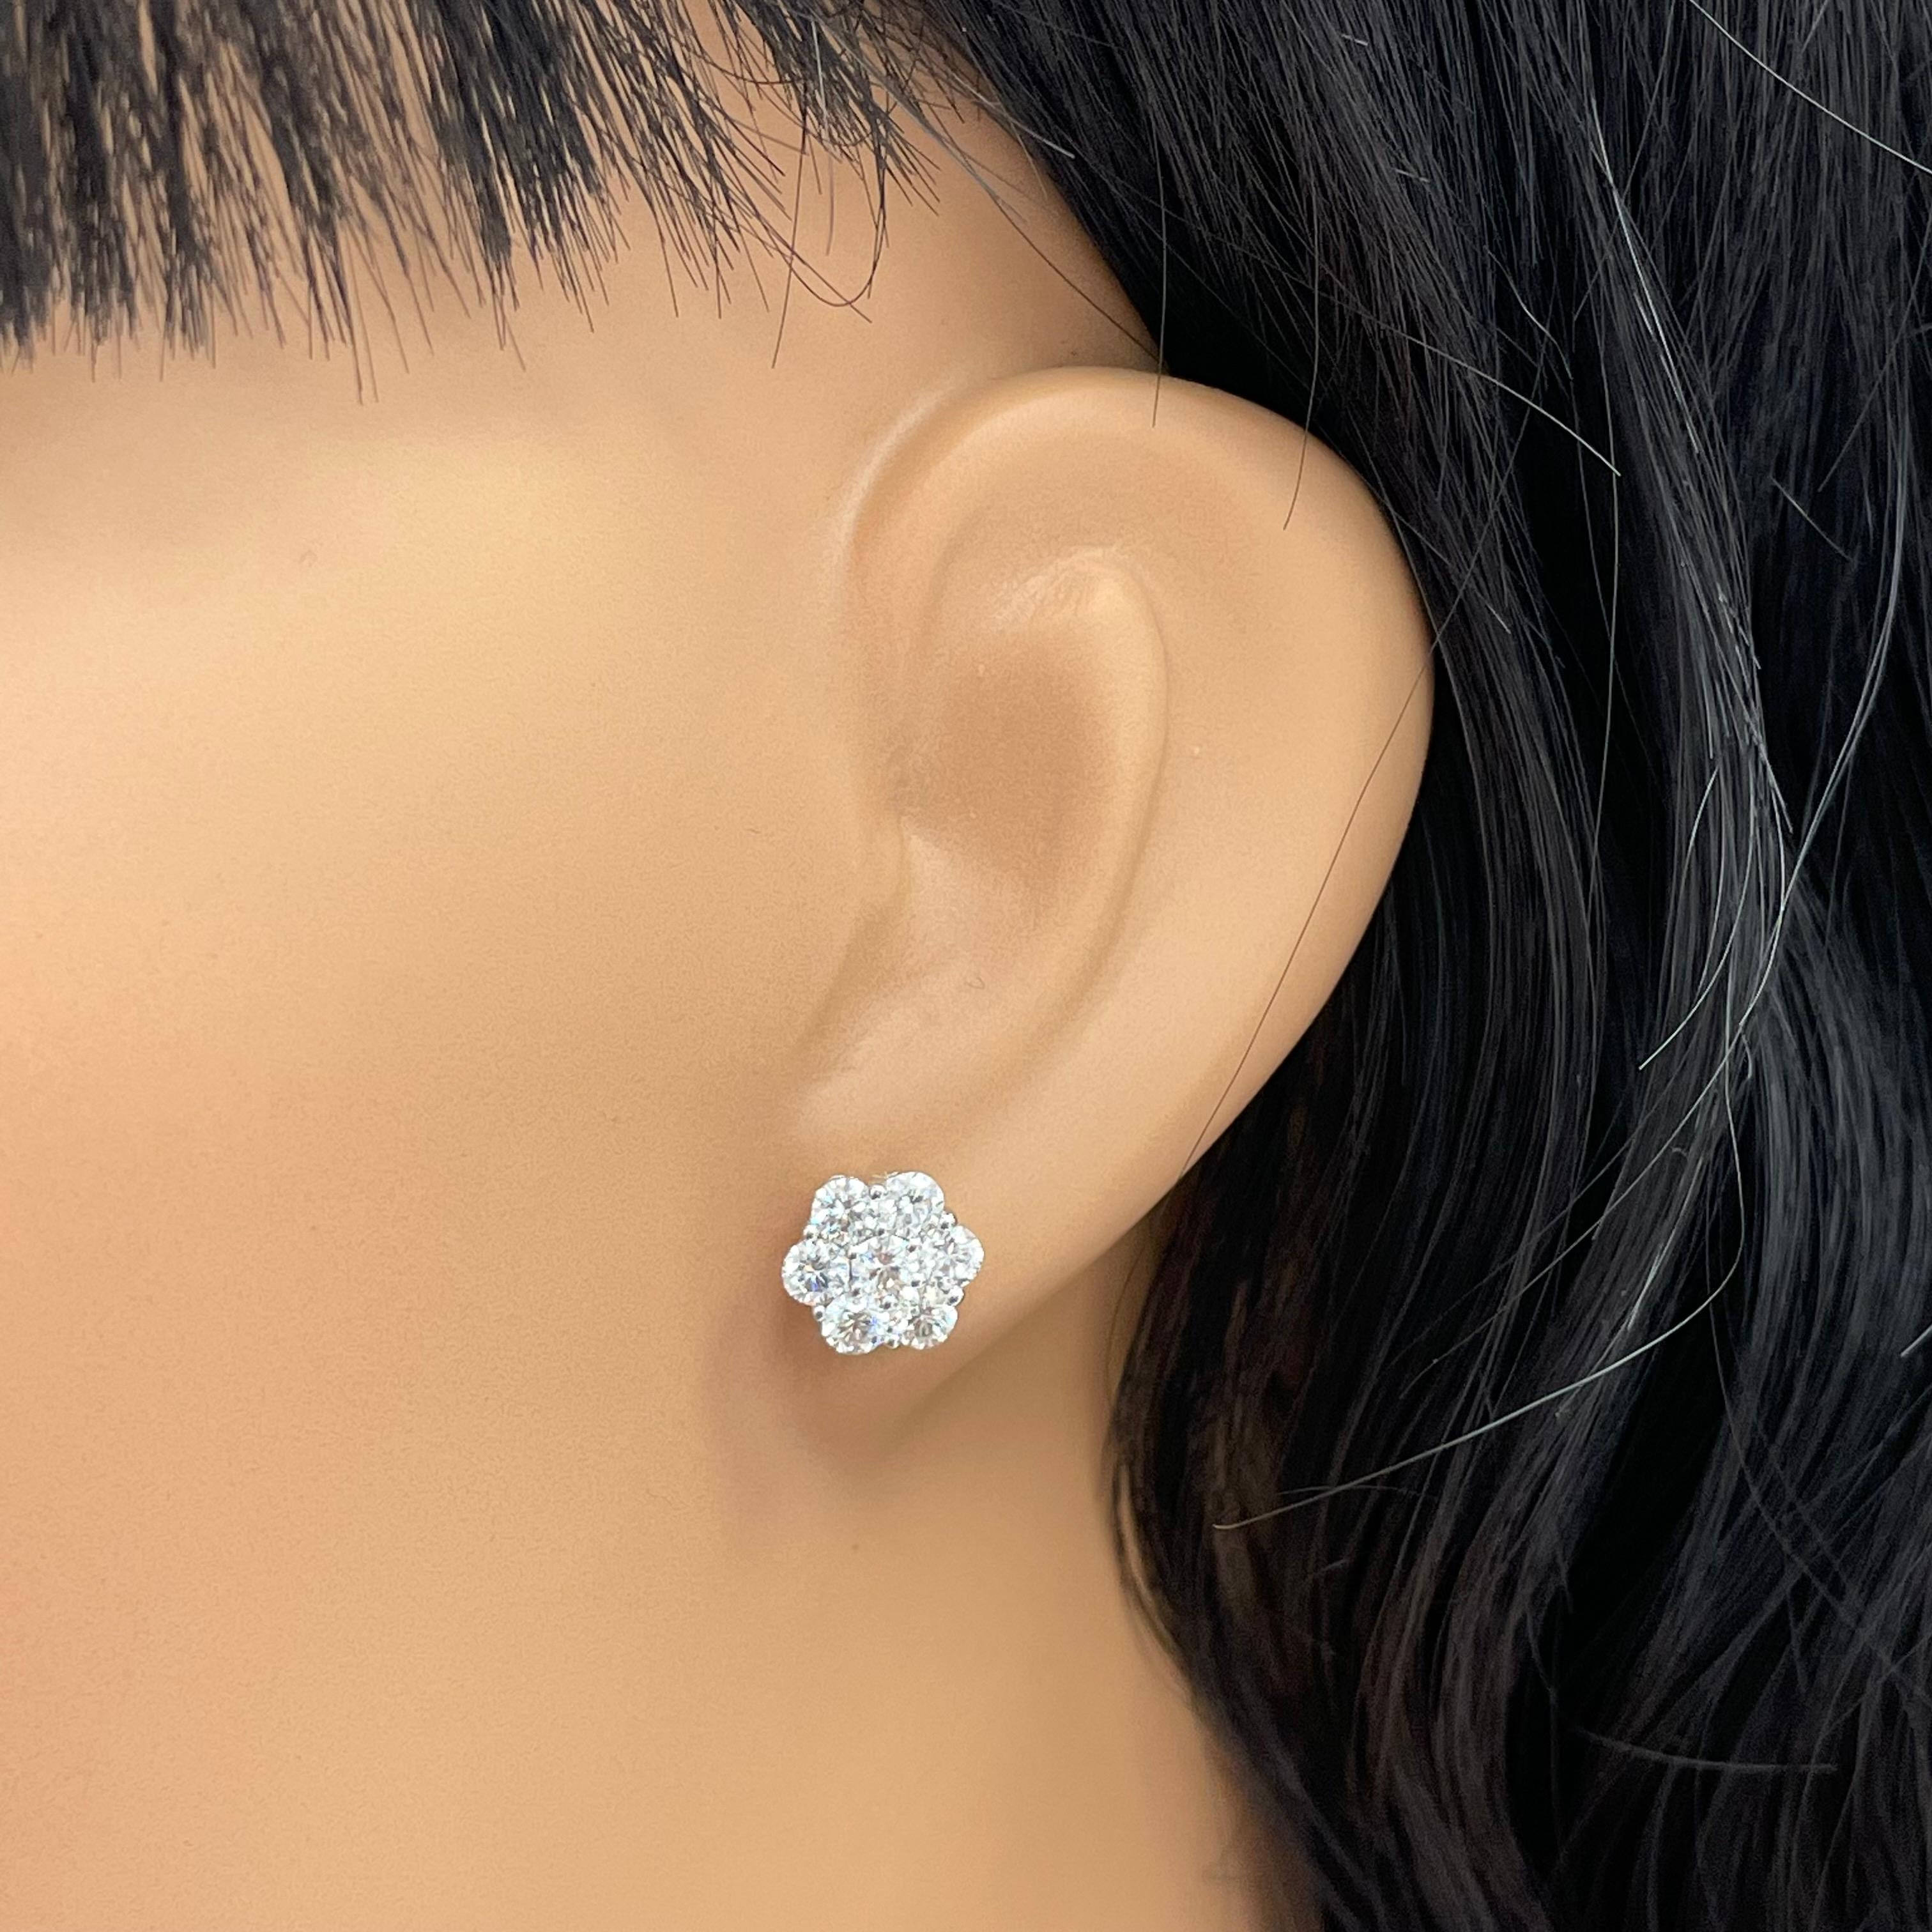 Diamond studs are a signature everyday piece of jewelry. They are a classic and elegant wear that is suitable for anywhere anytime. 

Diamonds Shape: Round
Diamond Weight: 1.27 ct 
Diamond Color: G - H
Diamond Clarity: VVS - VS (Very Very Slightly